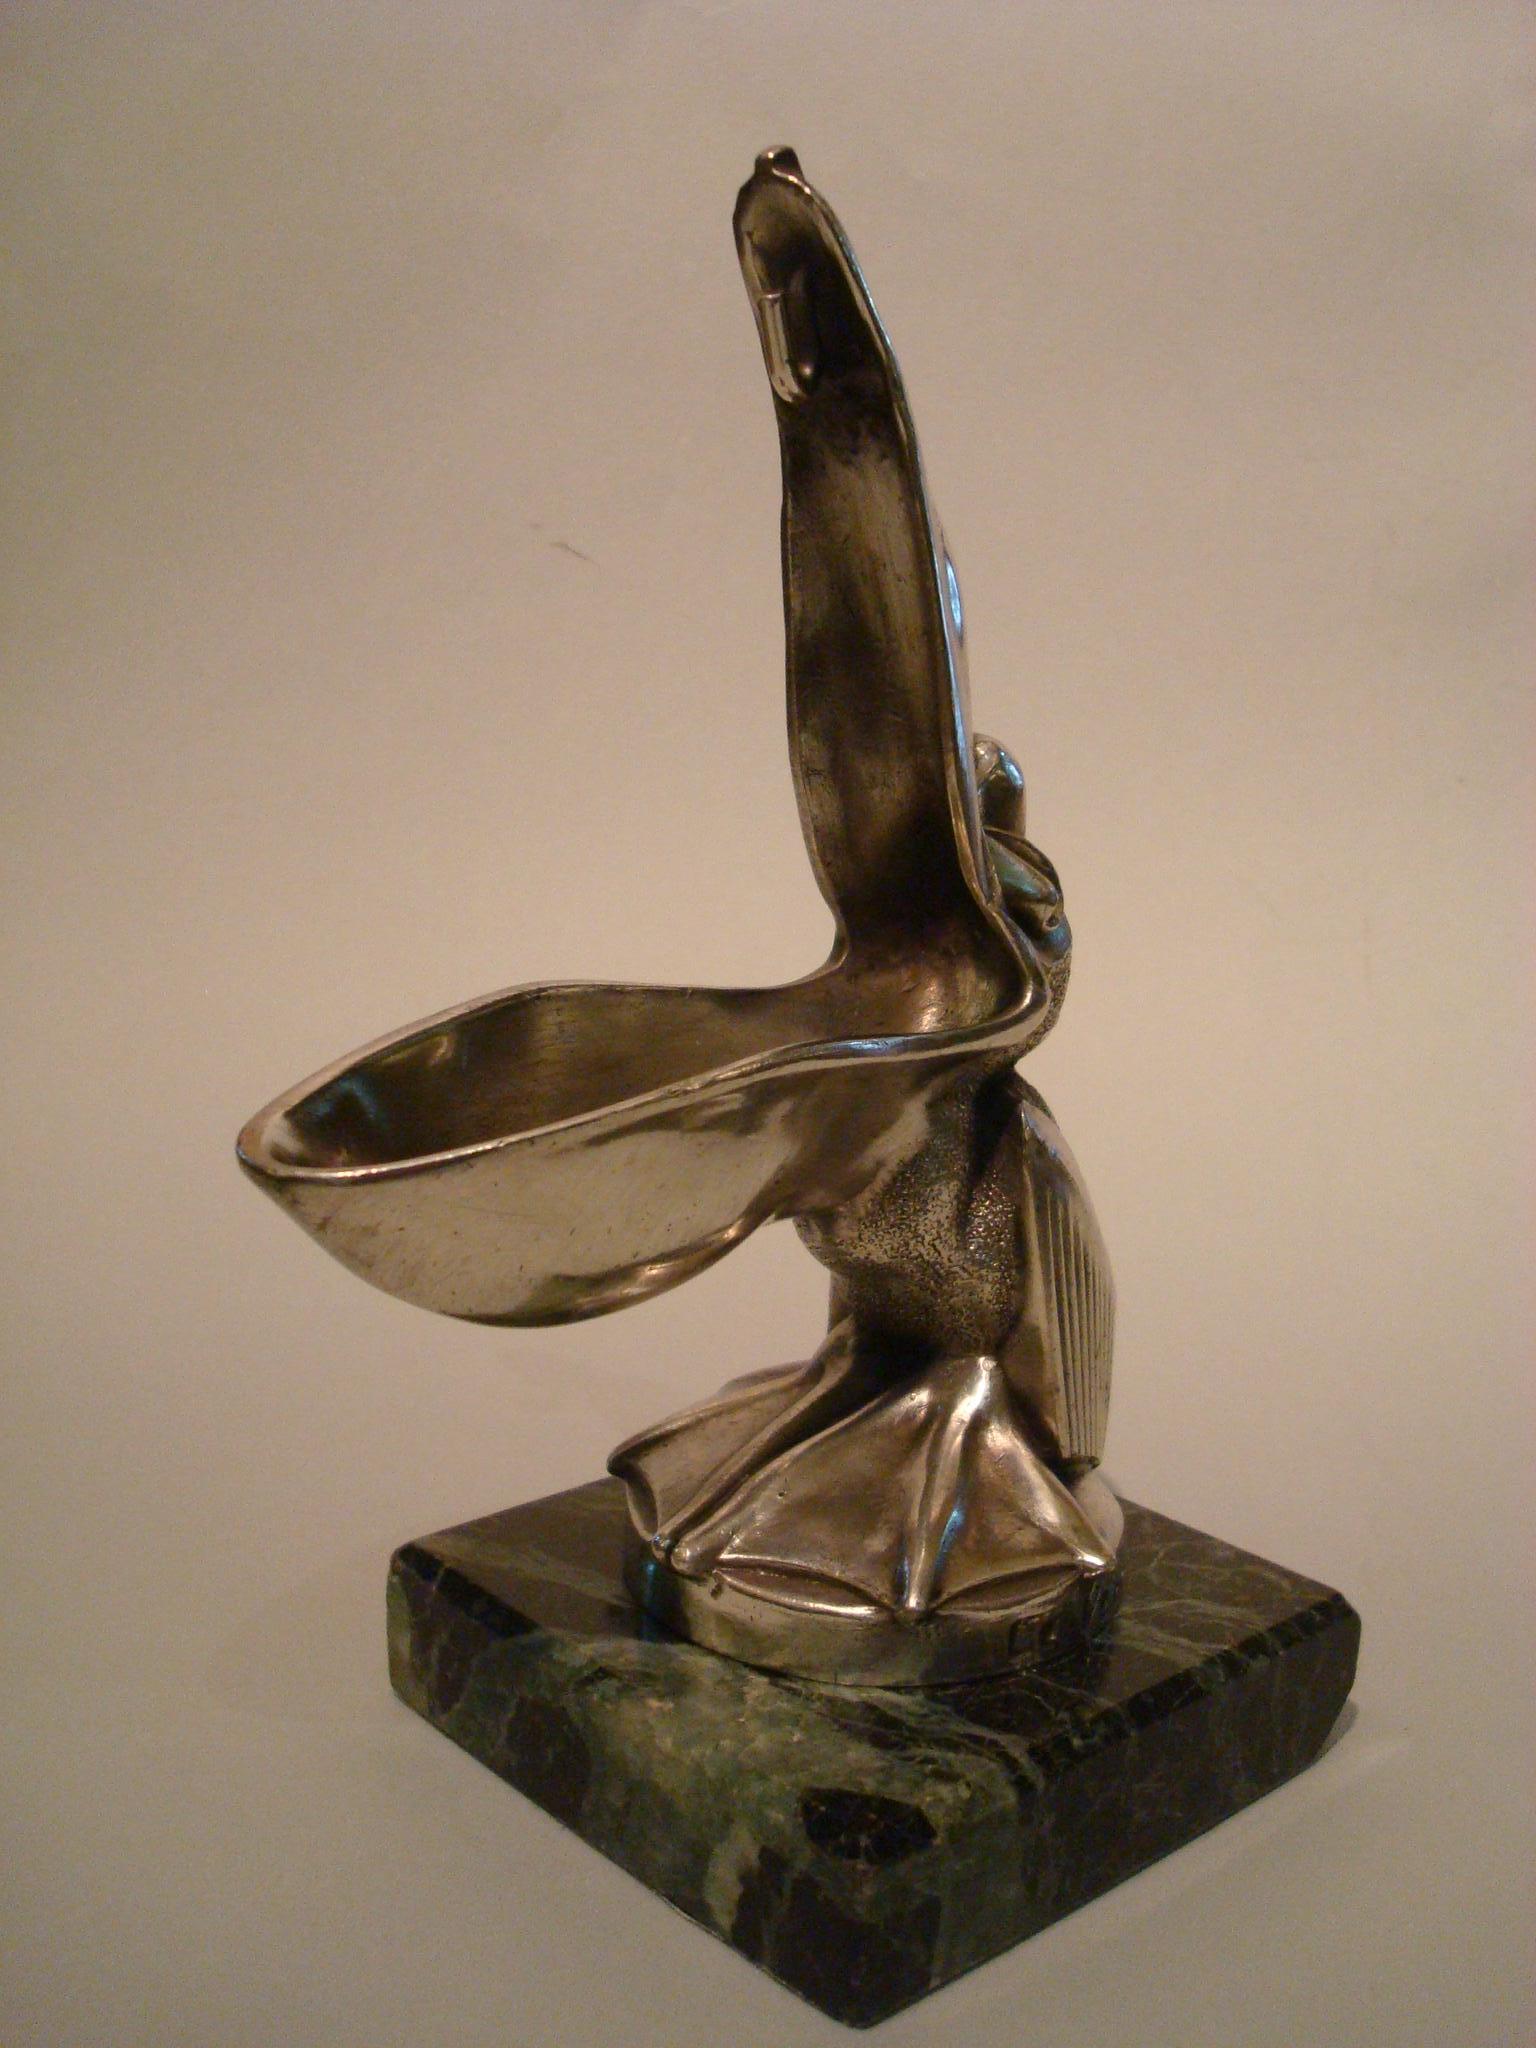 20th Century Art Deco Pelican Le Verrier Sculpture Car Mascot Paperweight Packet Watch Holder For Sale